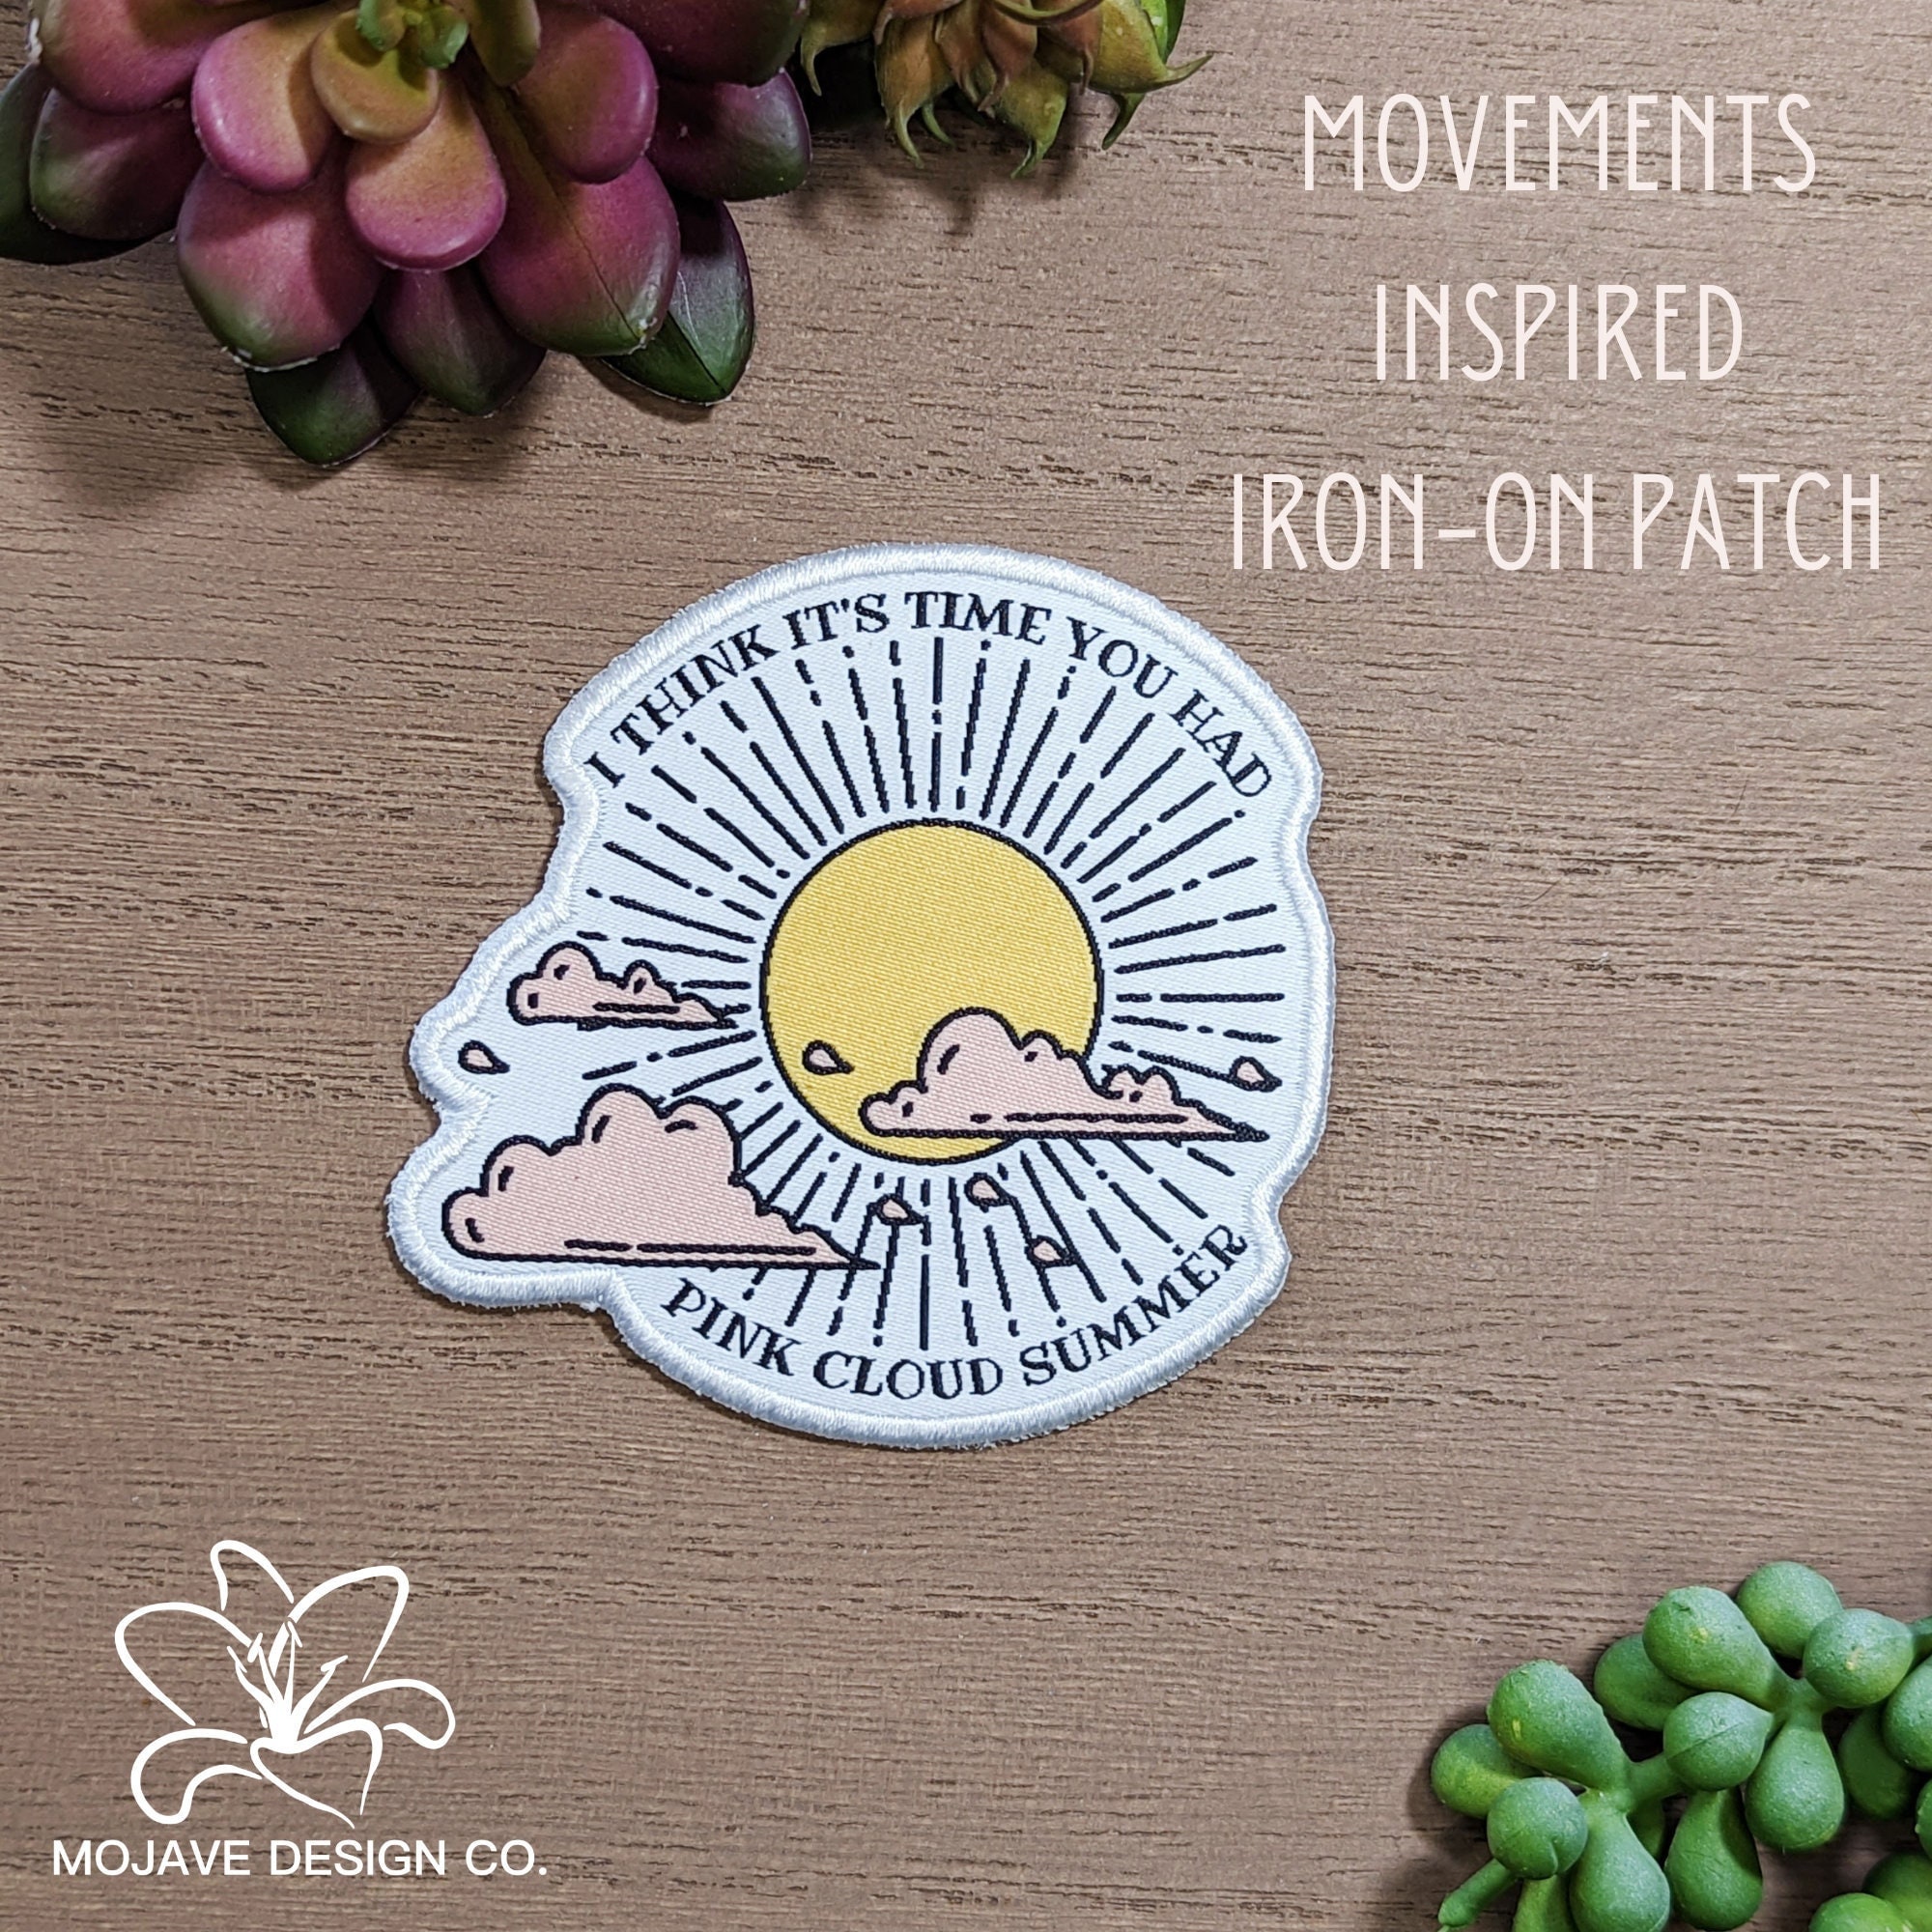 Buy Movements Sticker Movements Stickers Water Resistant Online in India   Etsy